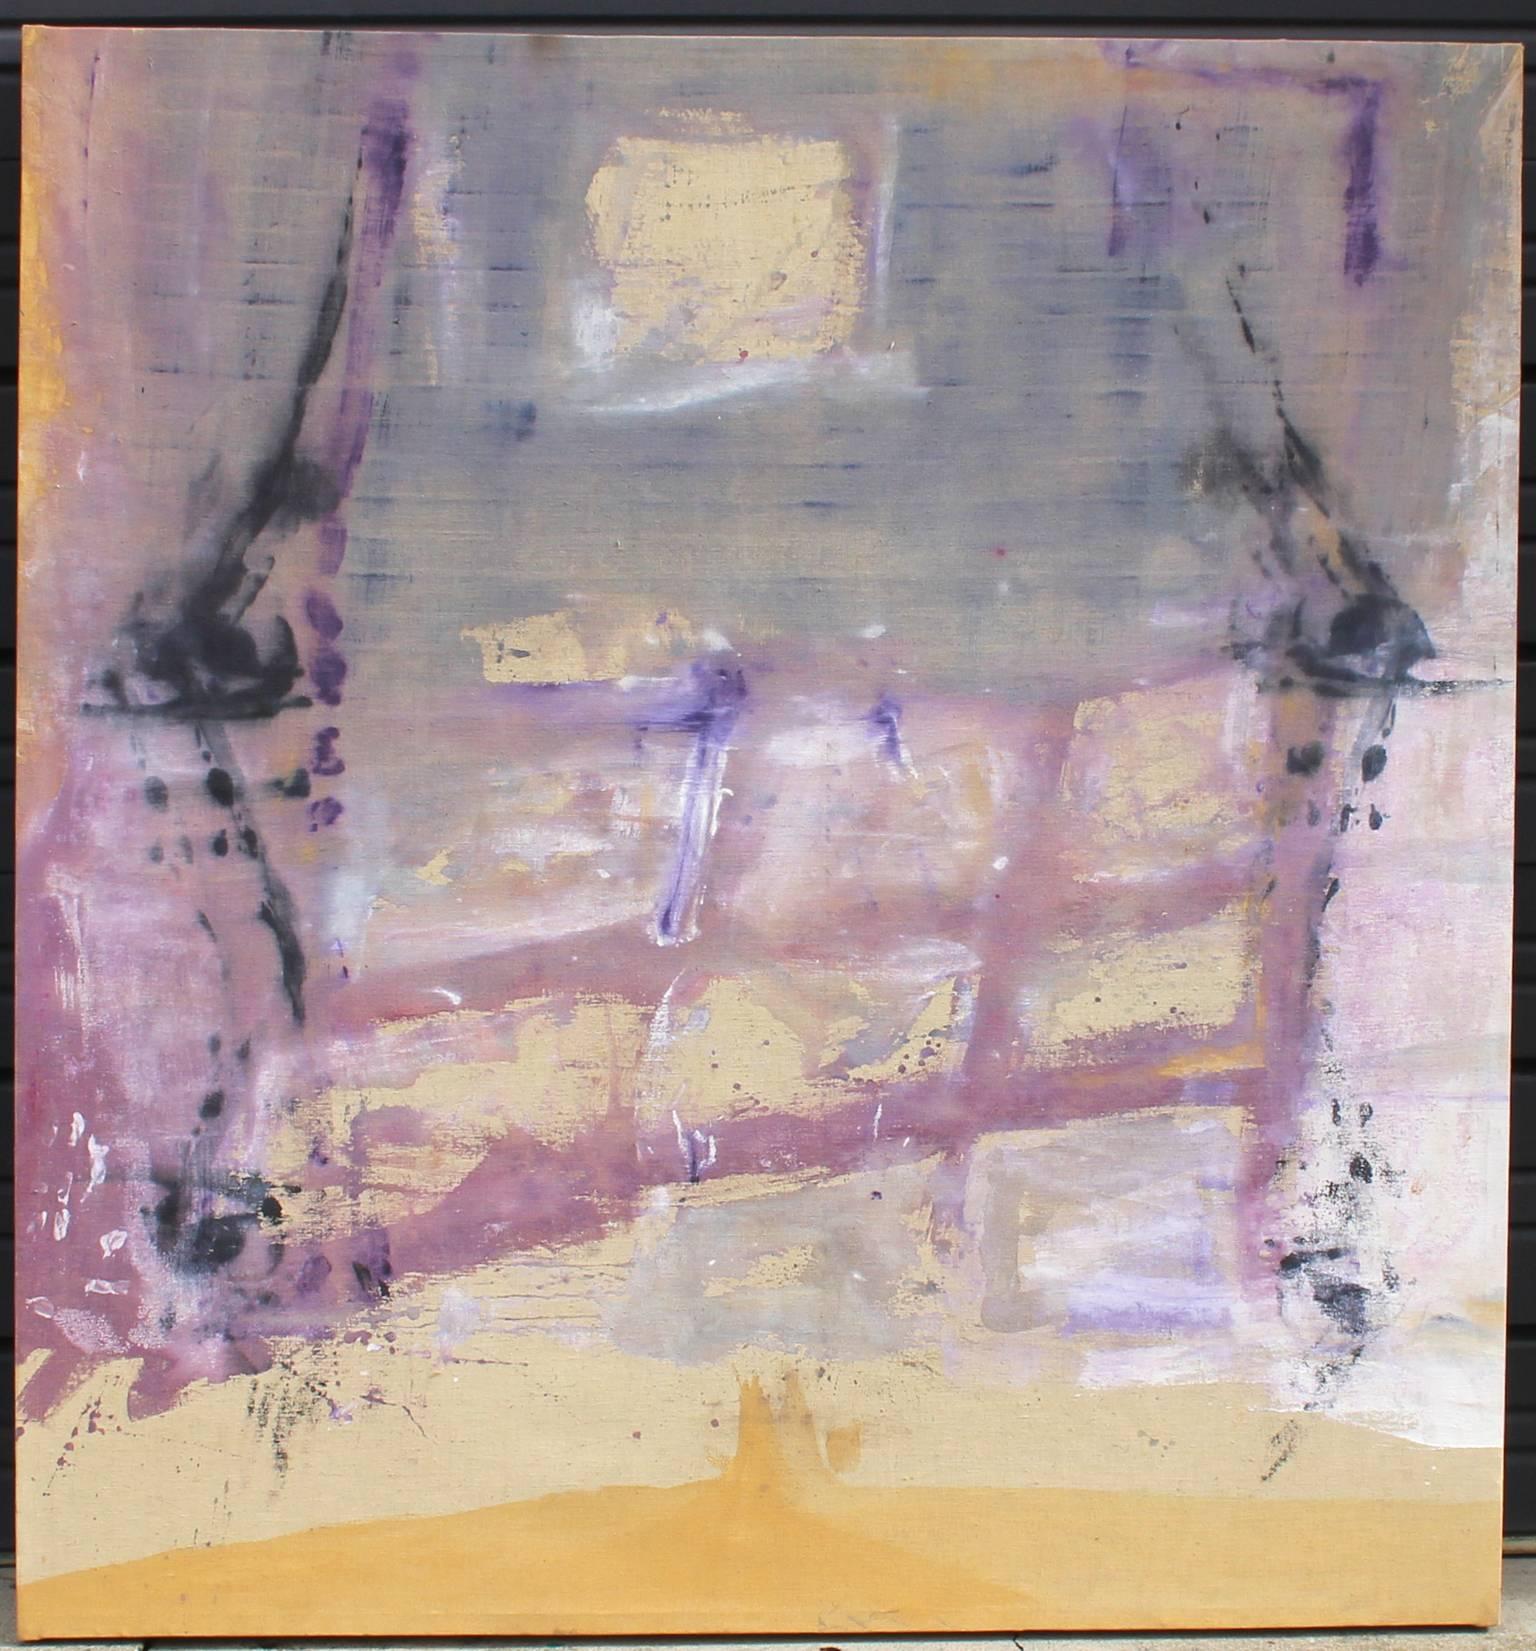 A mid-20th century abstract painting in a palette of purple, gray and yellow by an unknown artist.